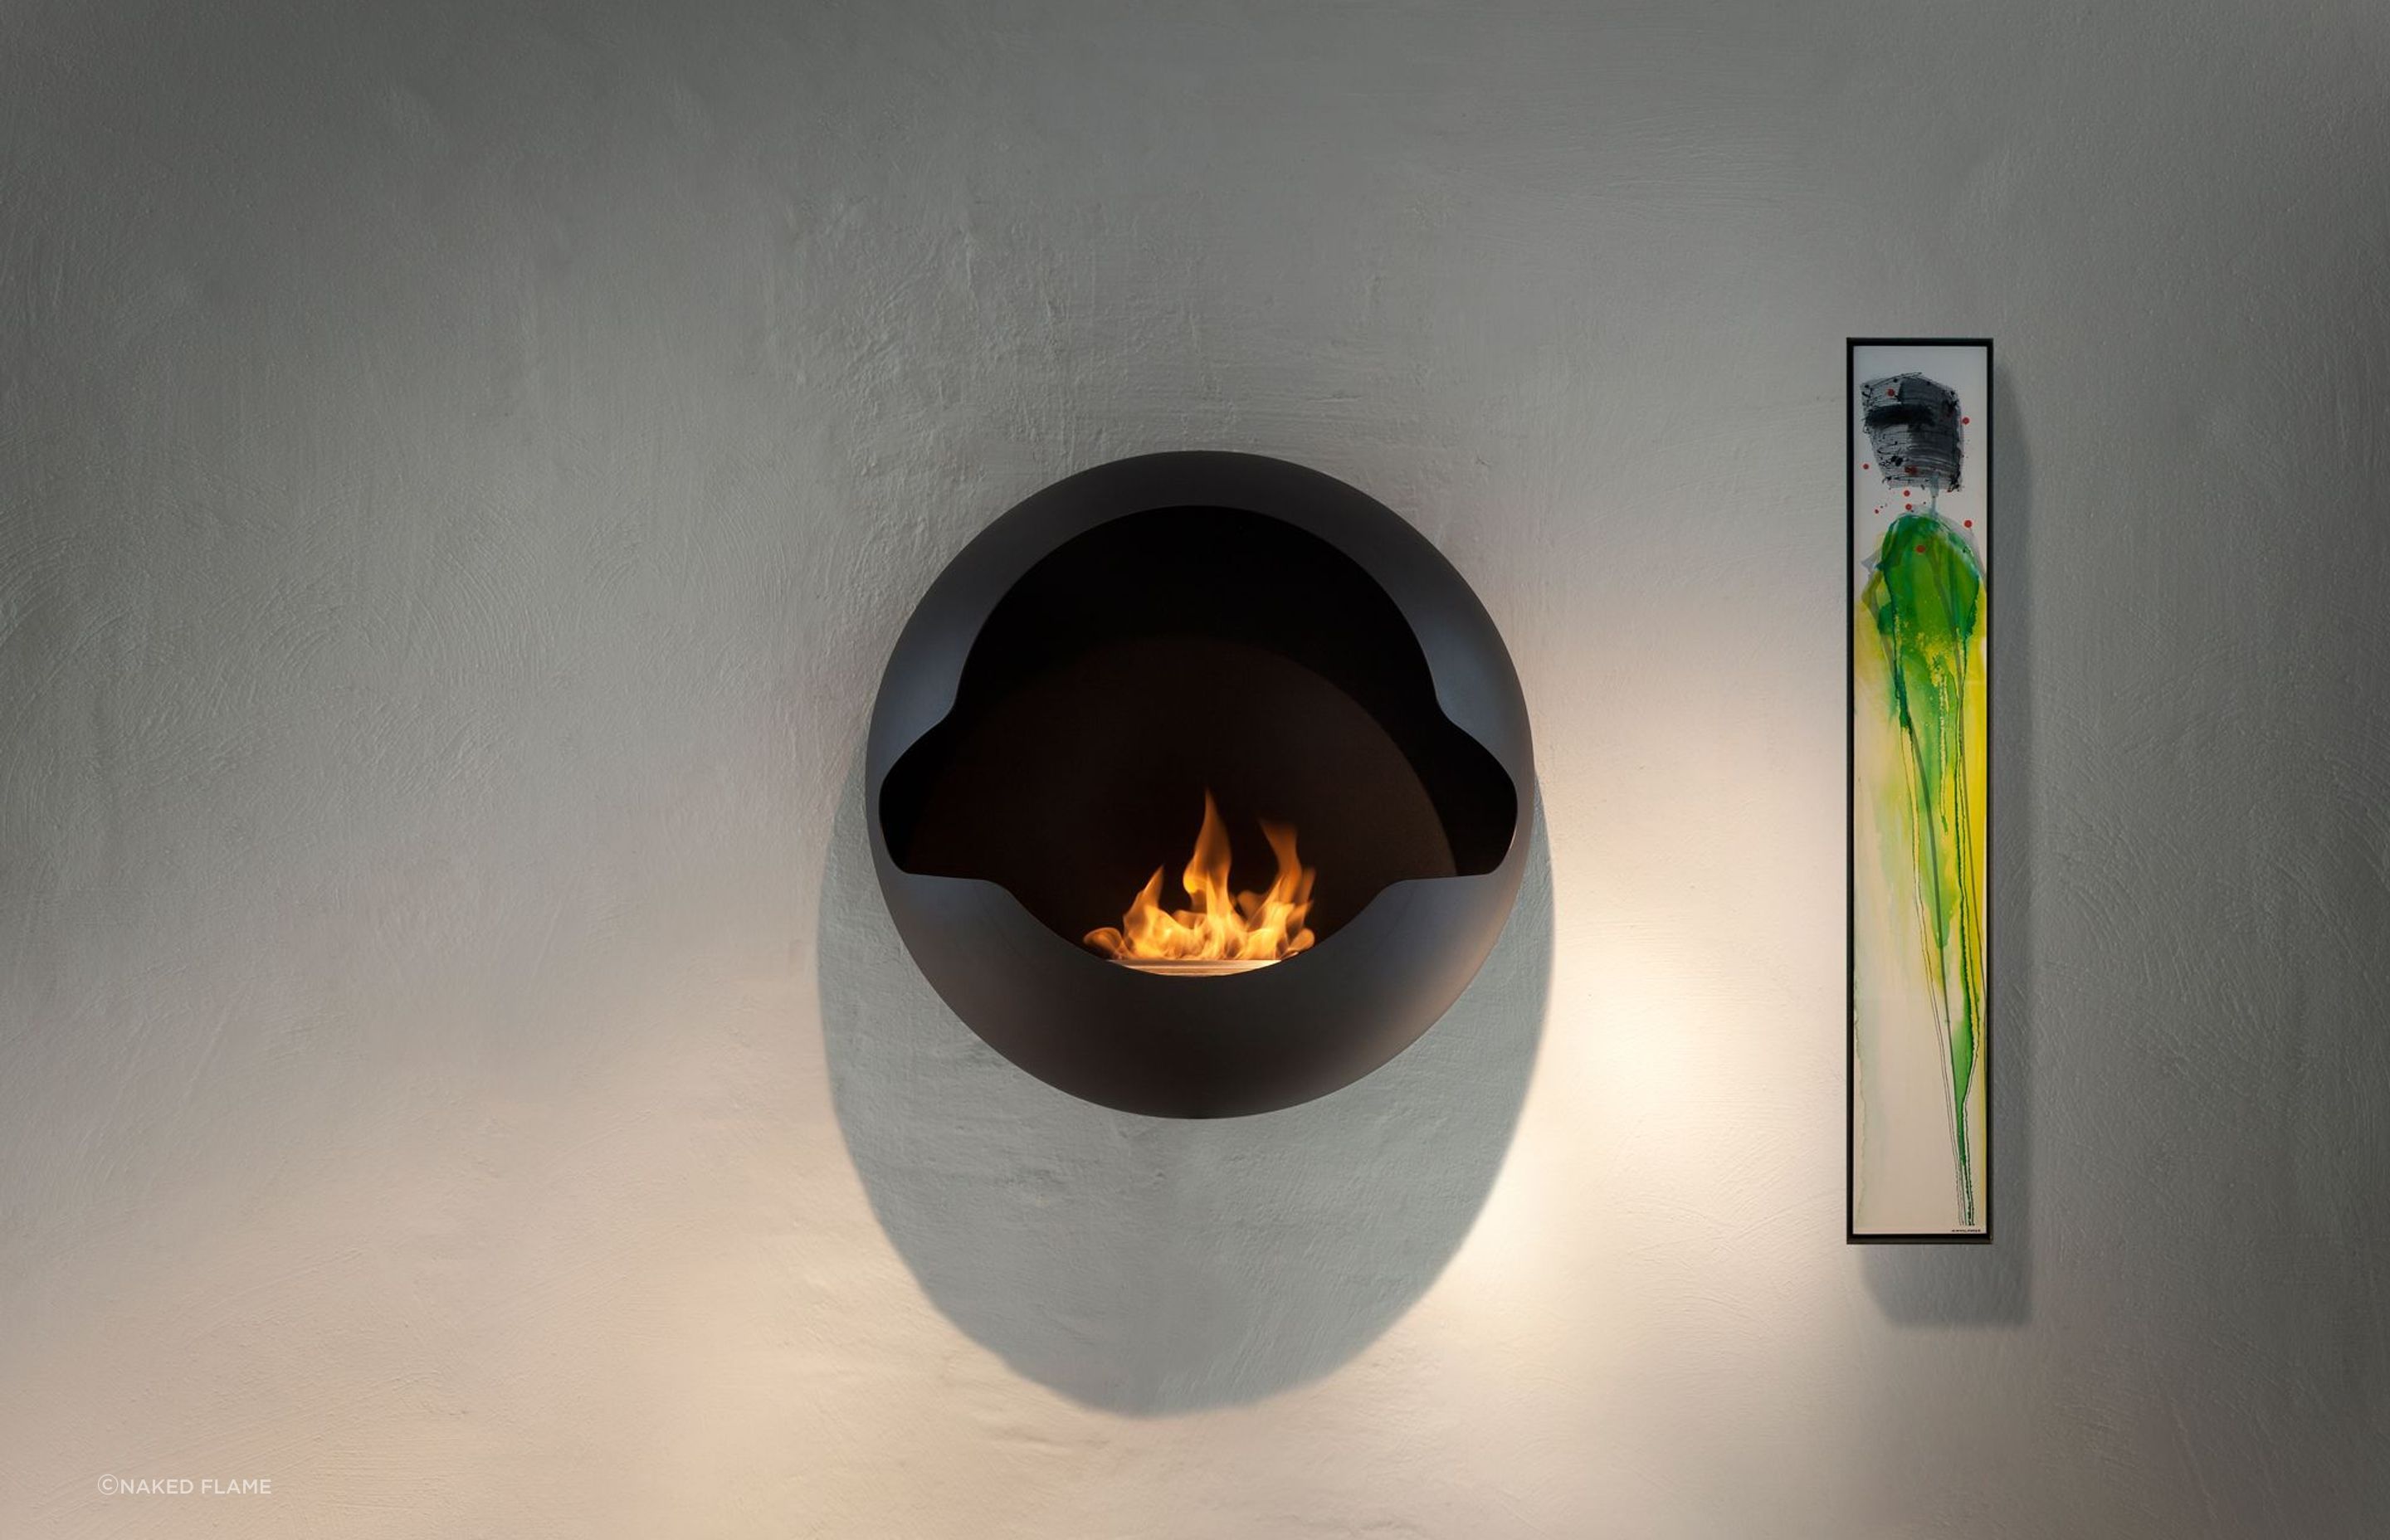 The wall-mounted Vauni Cupola Bioethanol Fireplace shows just how far fireplaces have come in terms of design and features